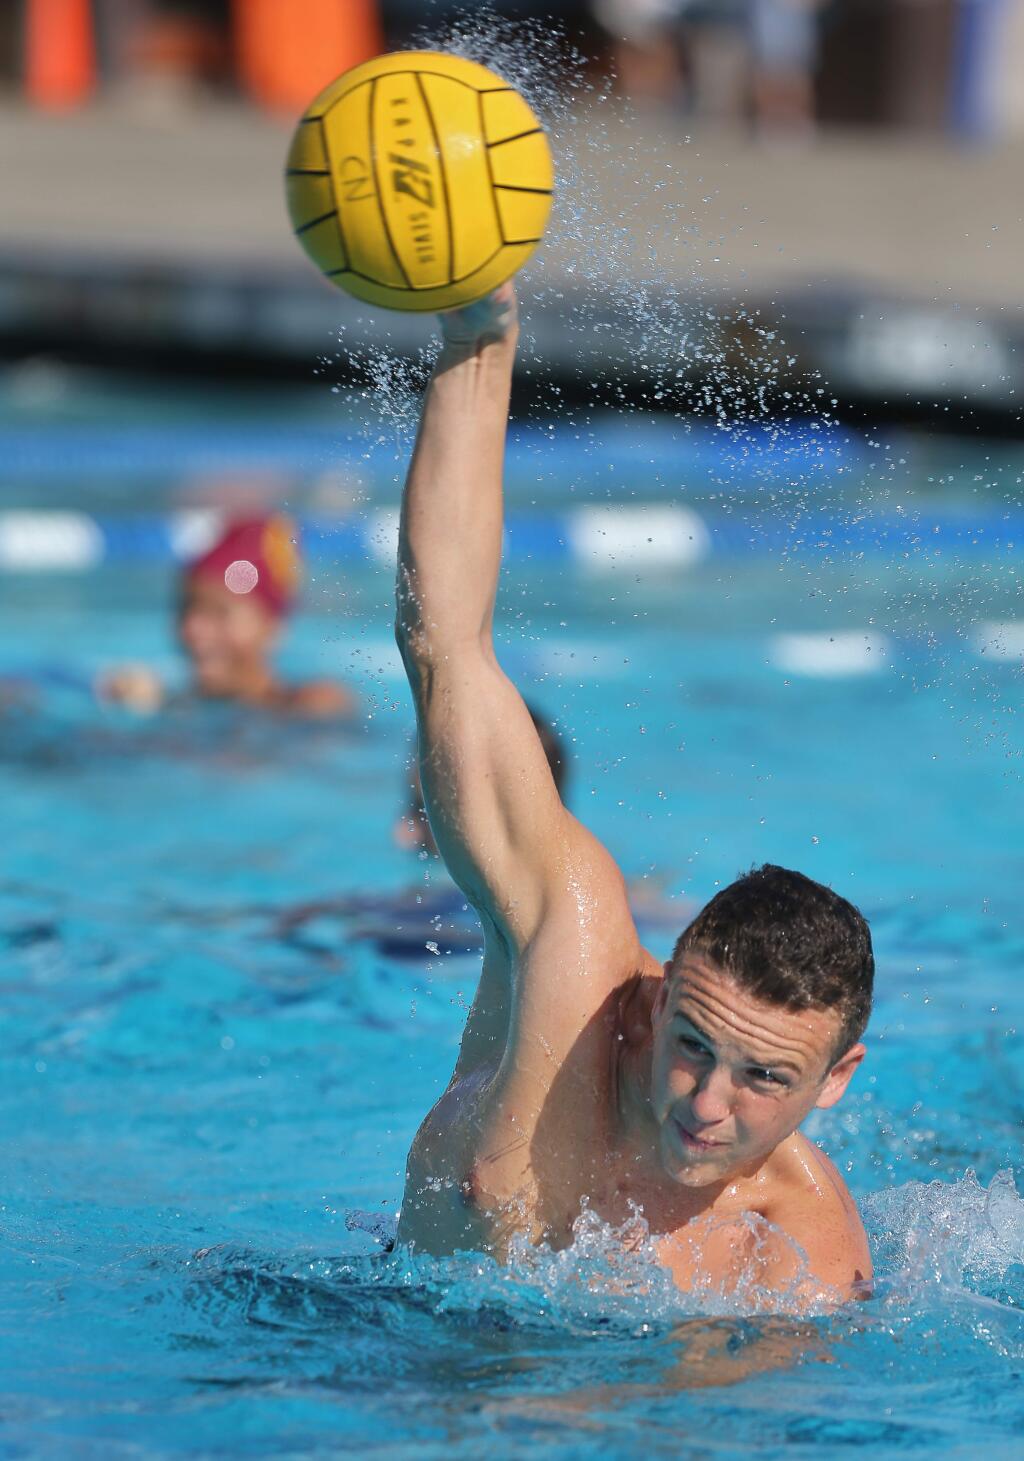 Cardinal Newman water polo player Bennett Stafford takes a shot on goal during practice in Santa Rosa on Monday, Sept. 16, 2019. (Christopher Chung / The Press Democrat)